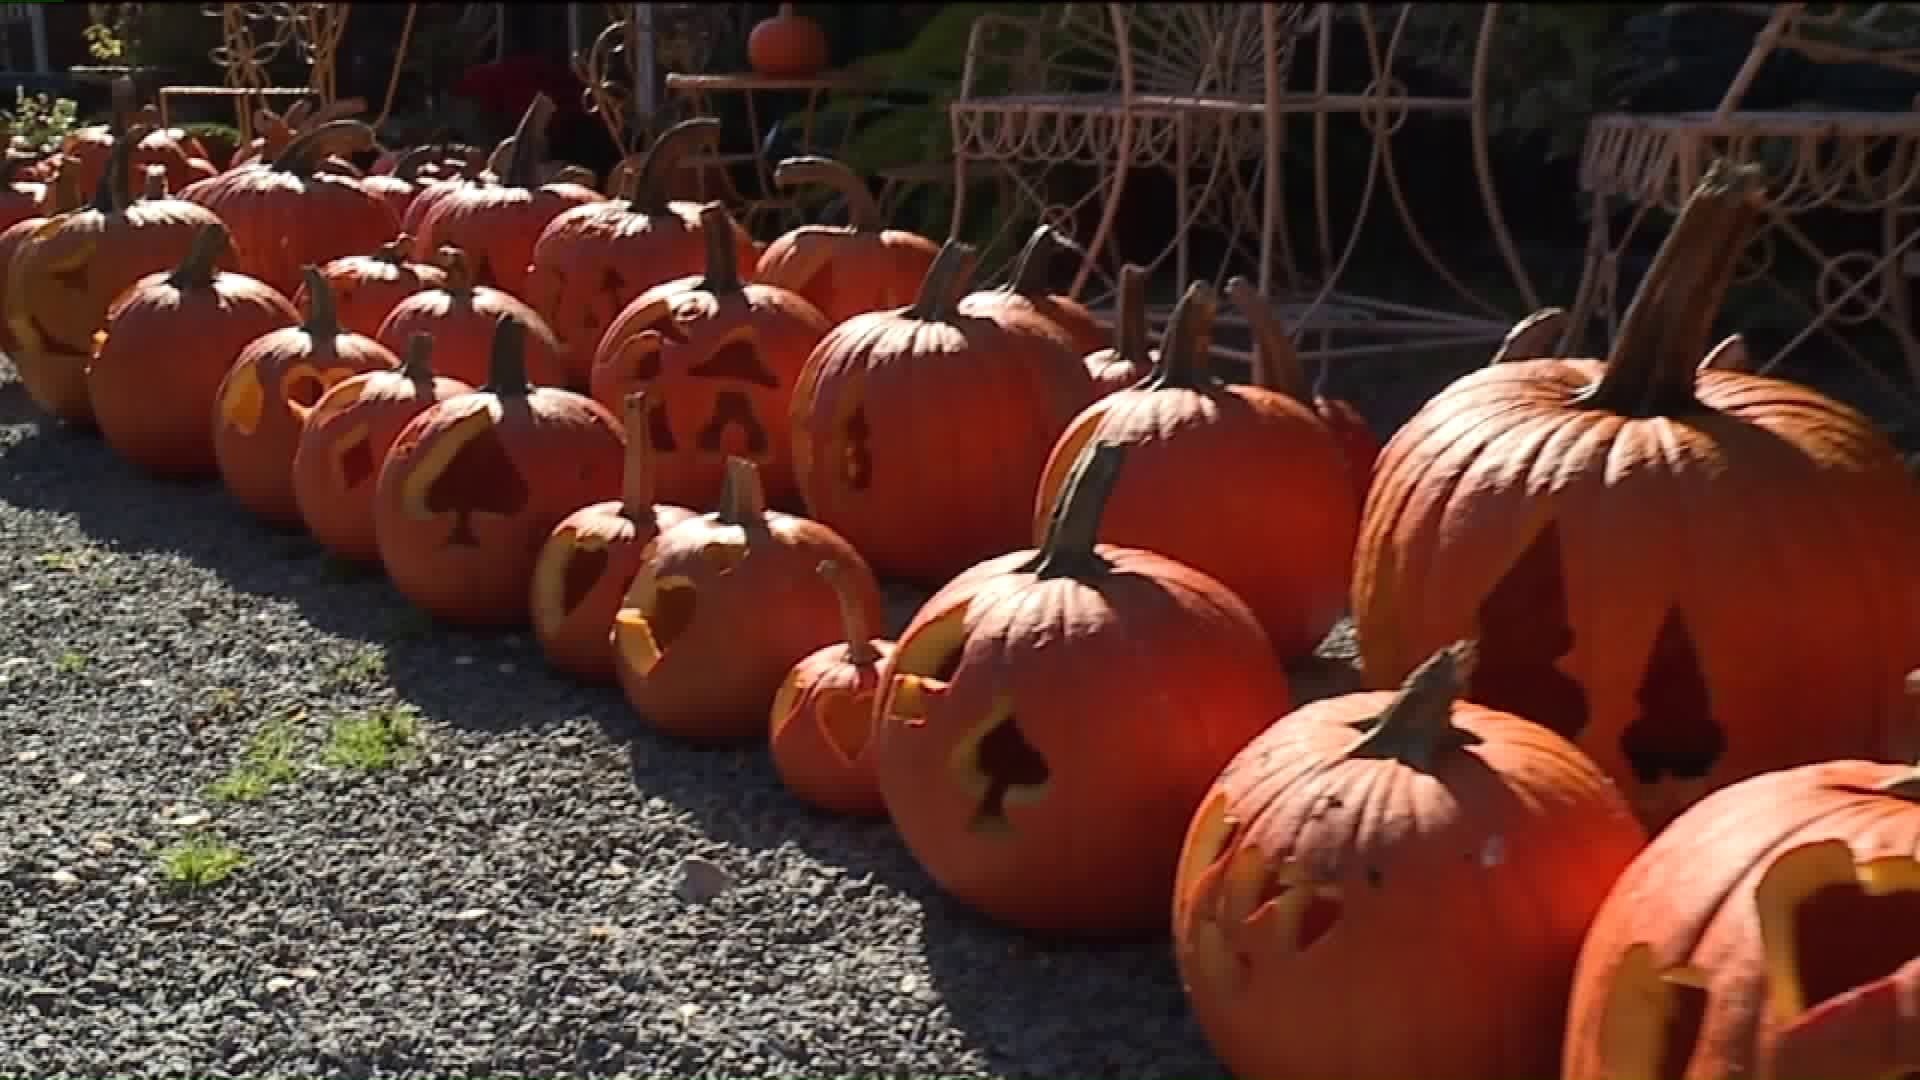 Wyoming County Business Gets in the Fall Spirit